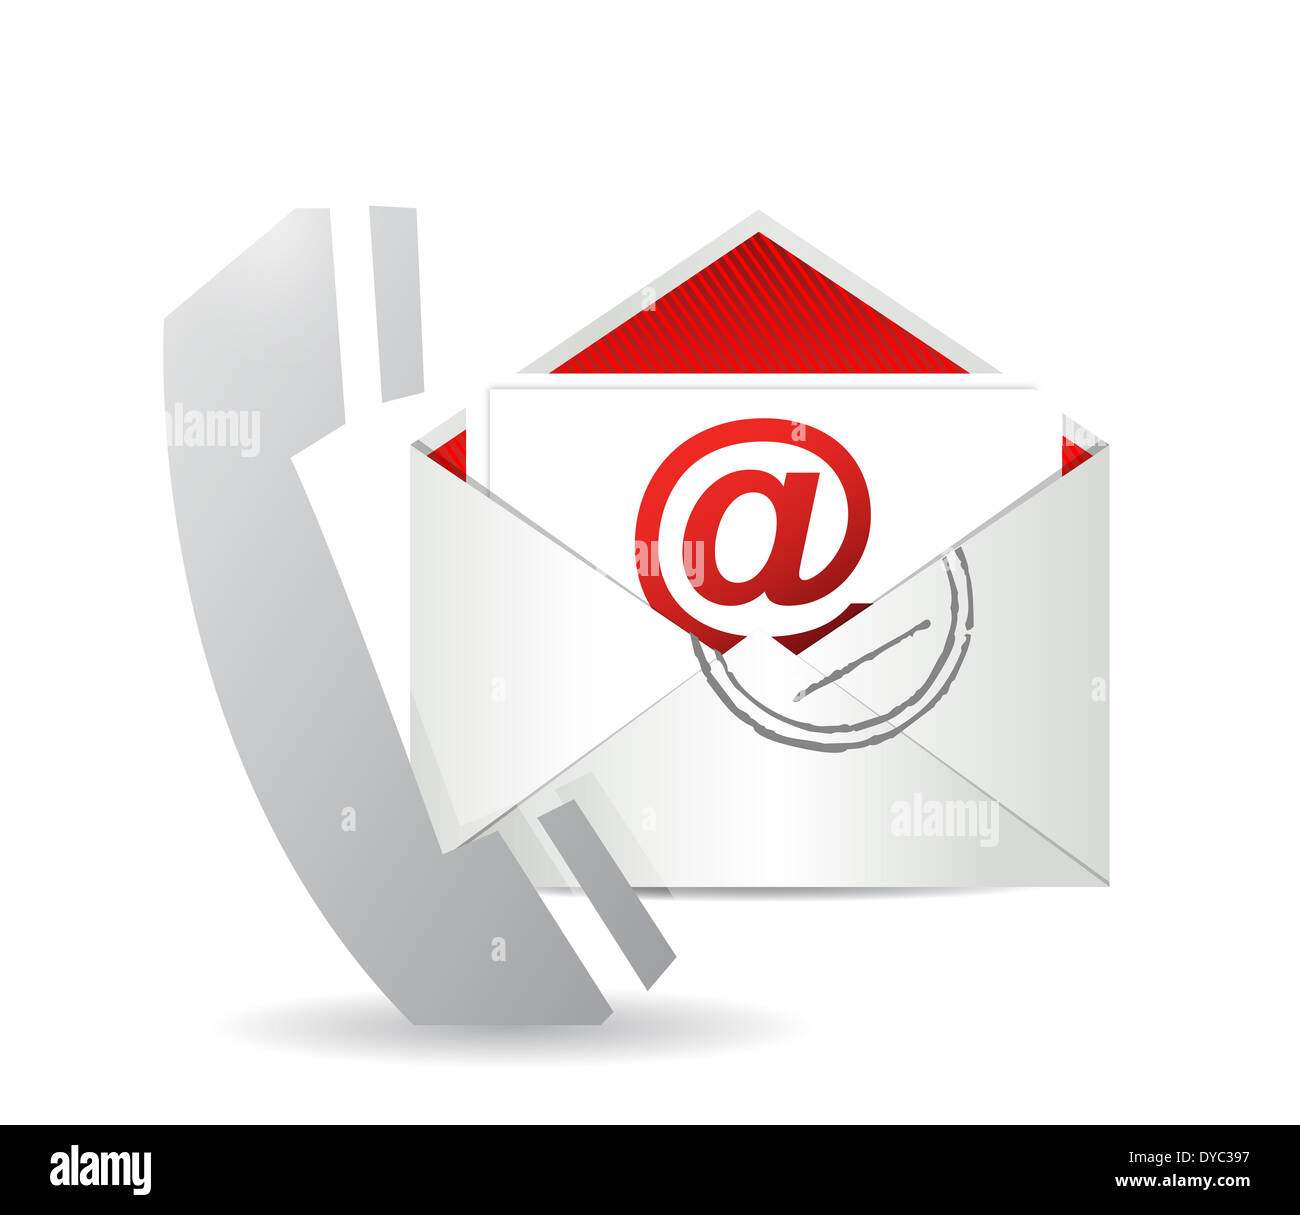 phone and email. illustration design over a white background Stock Photo